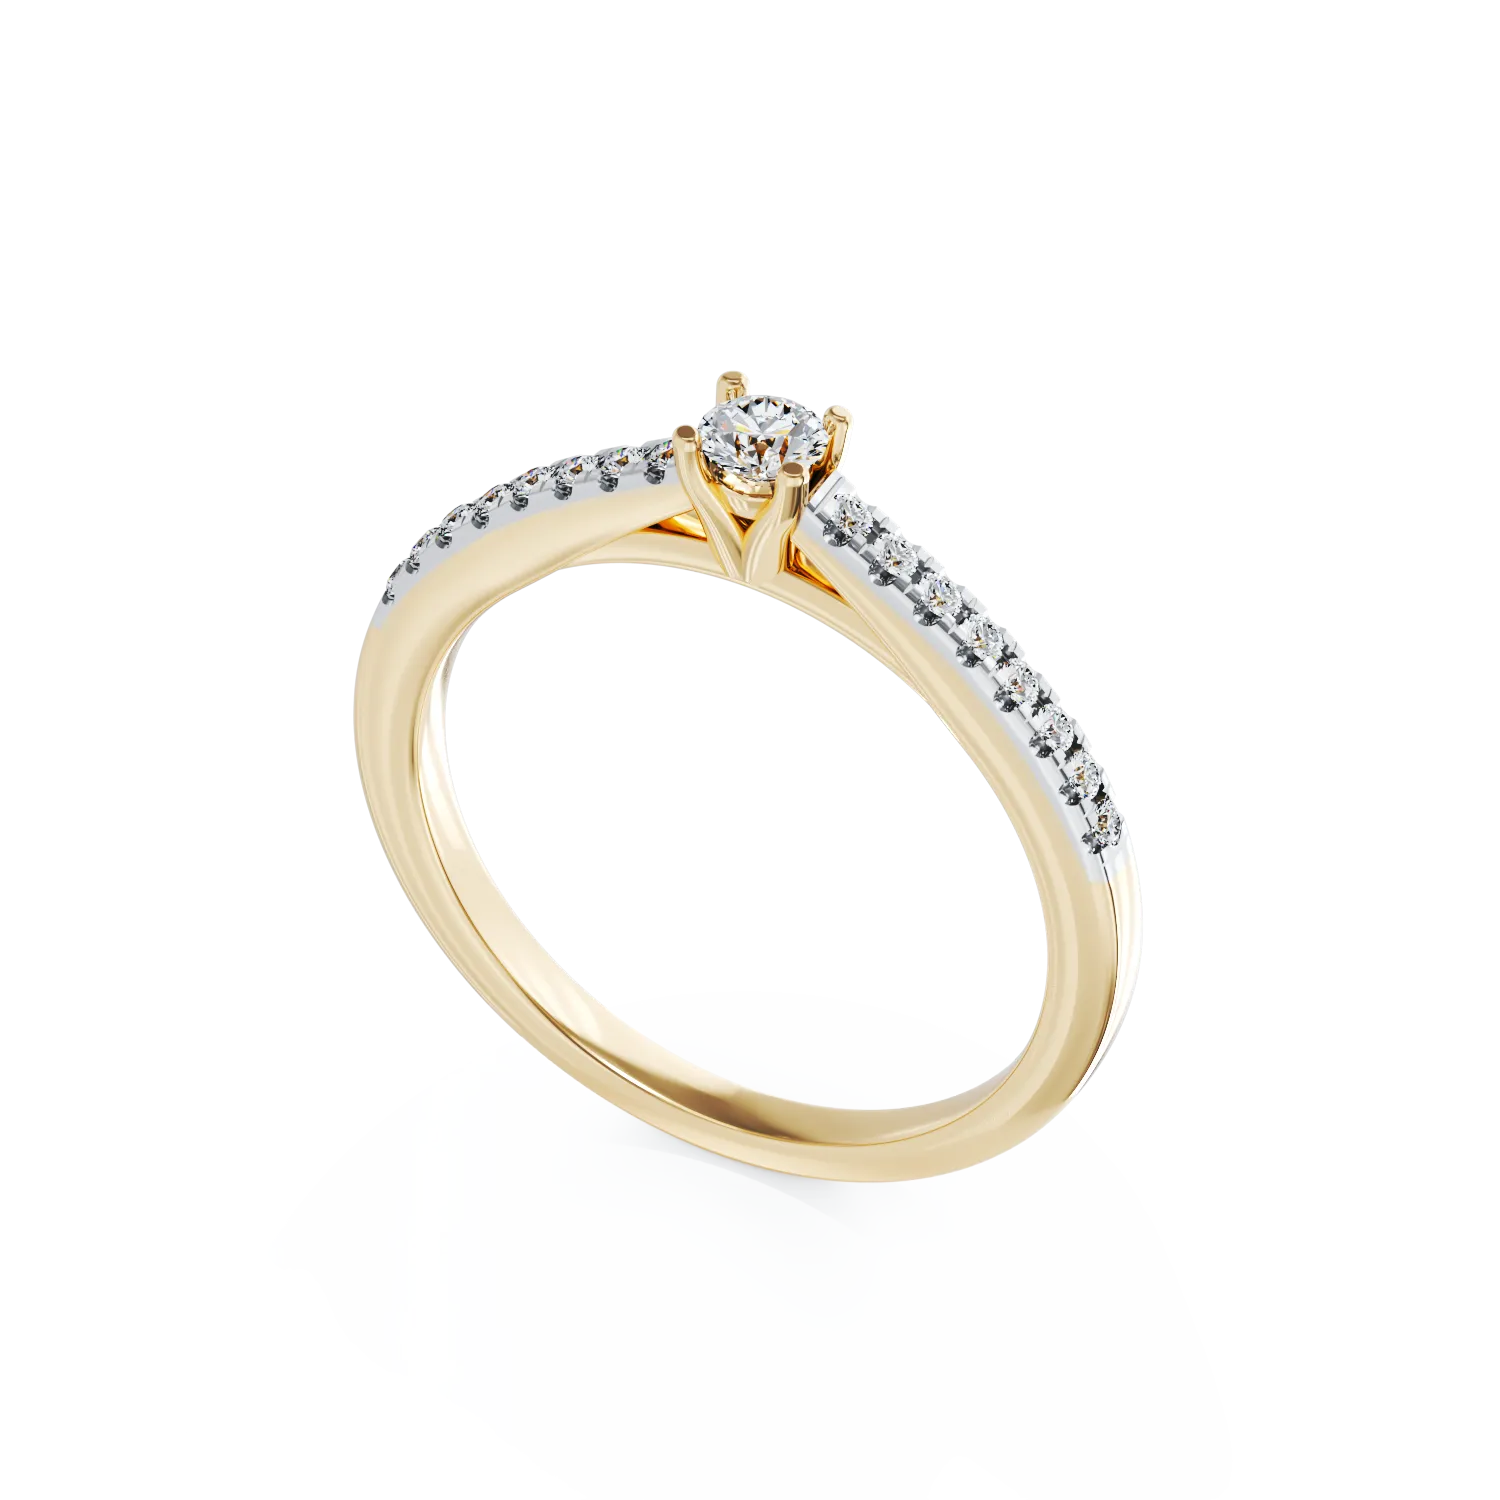 18K yellow gold engagement ring with 0.2ct diamond and 0.19ct diamonds